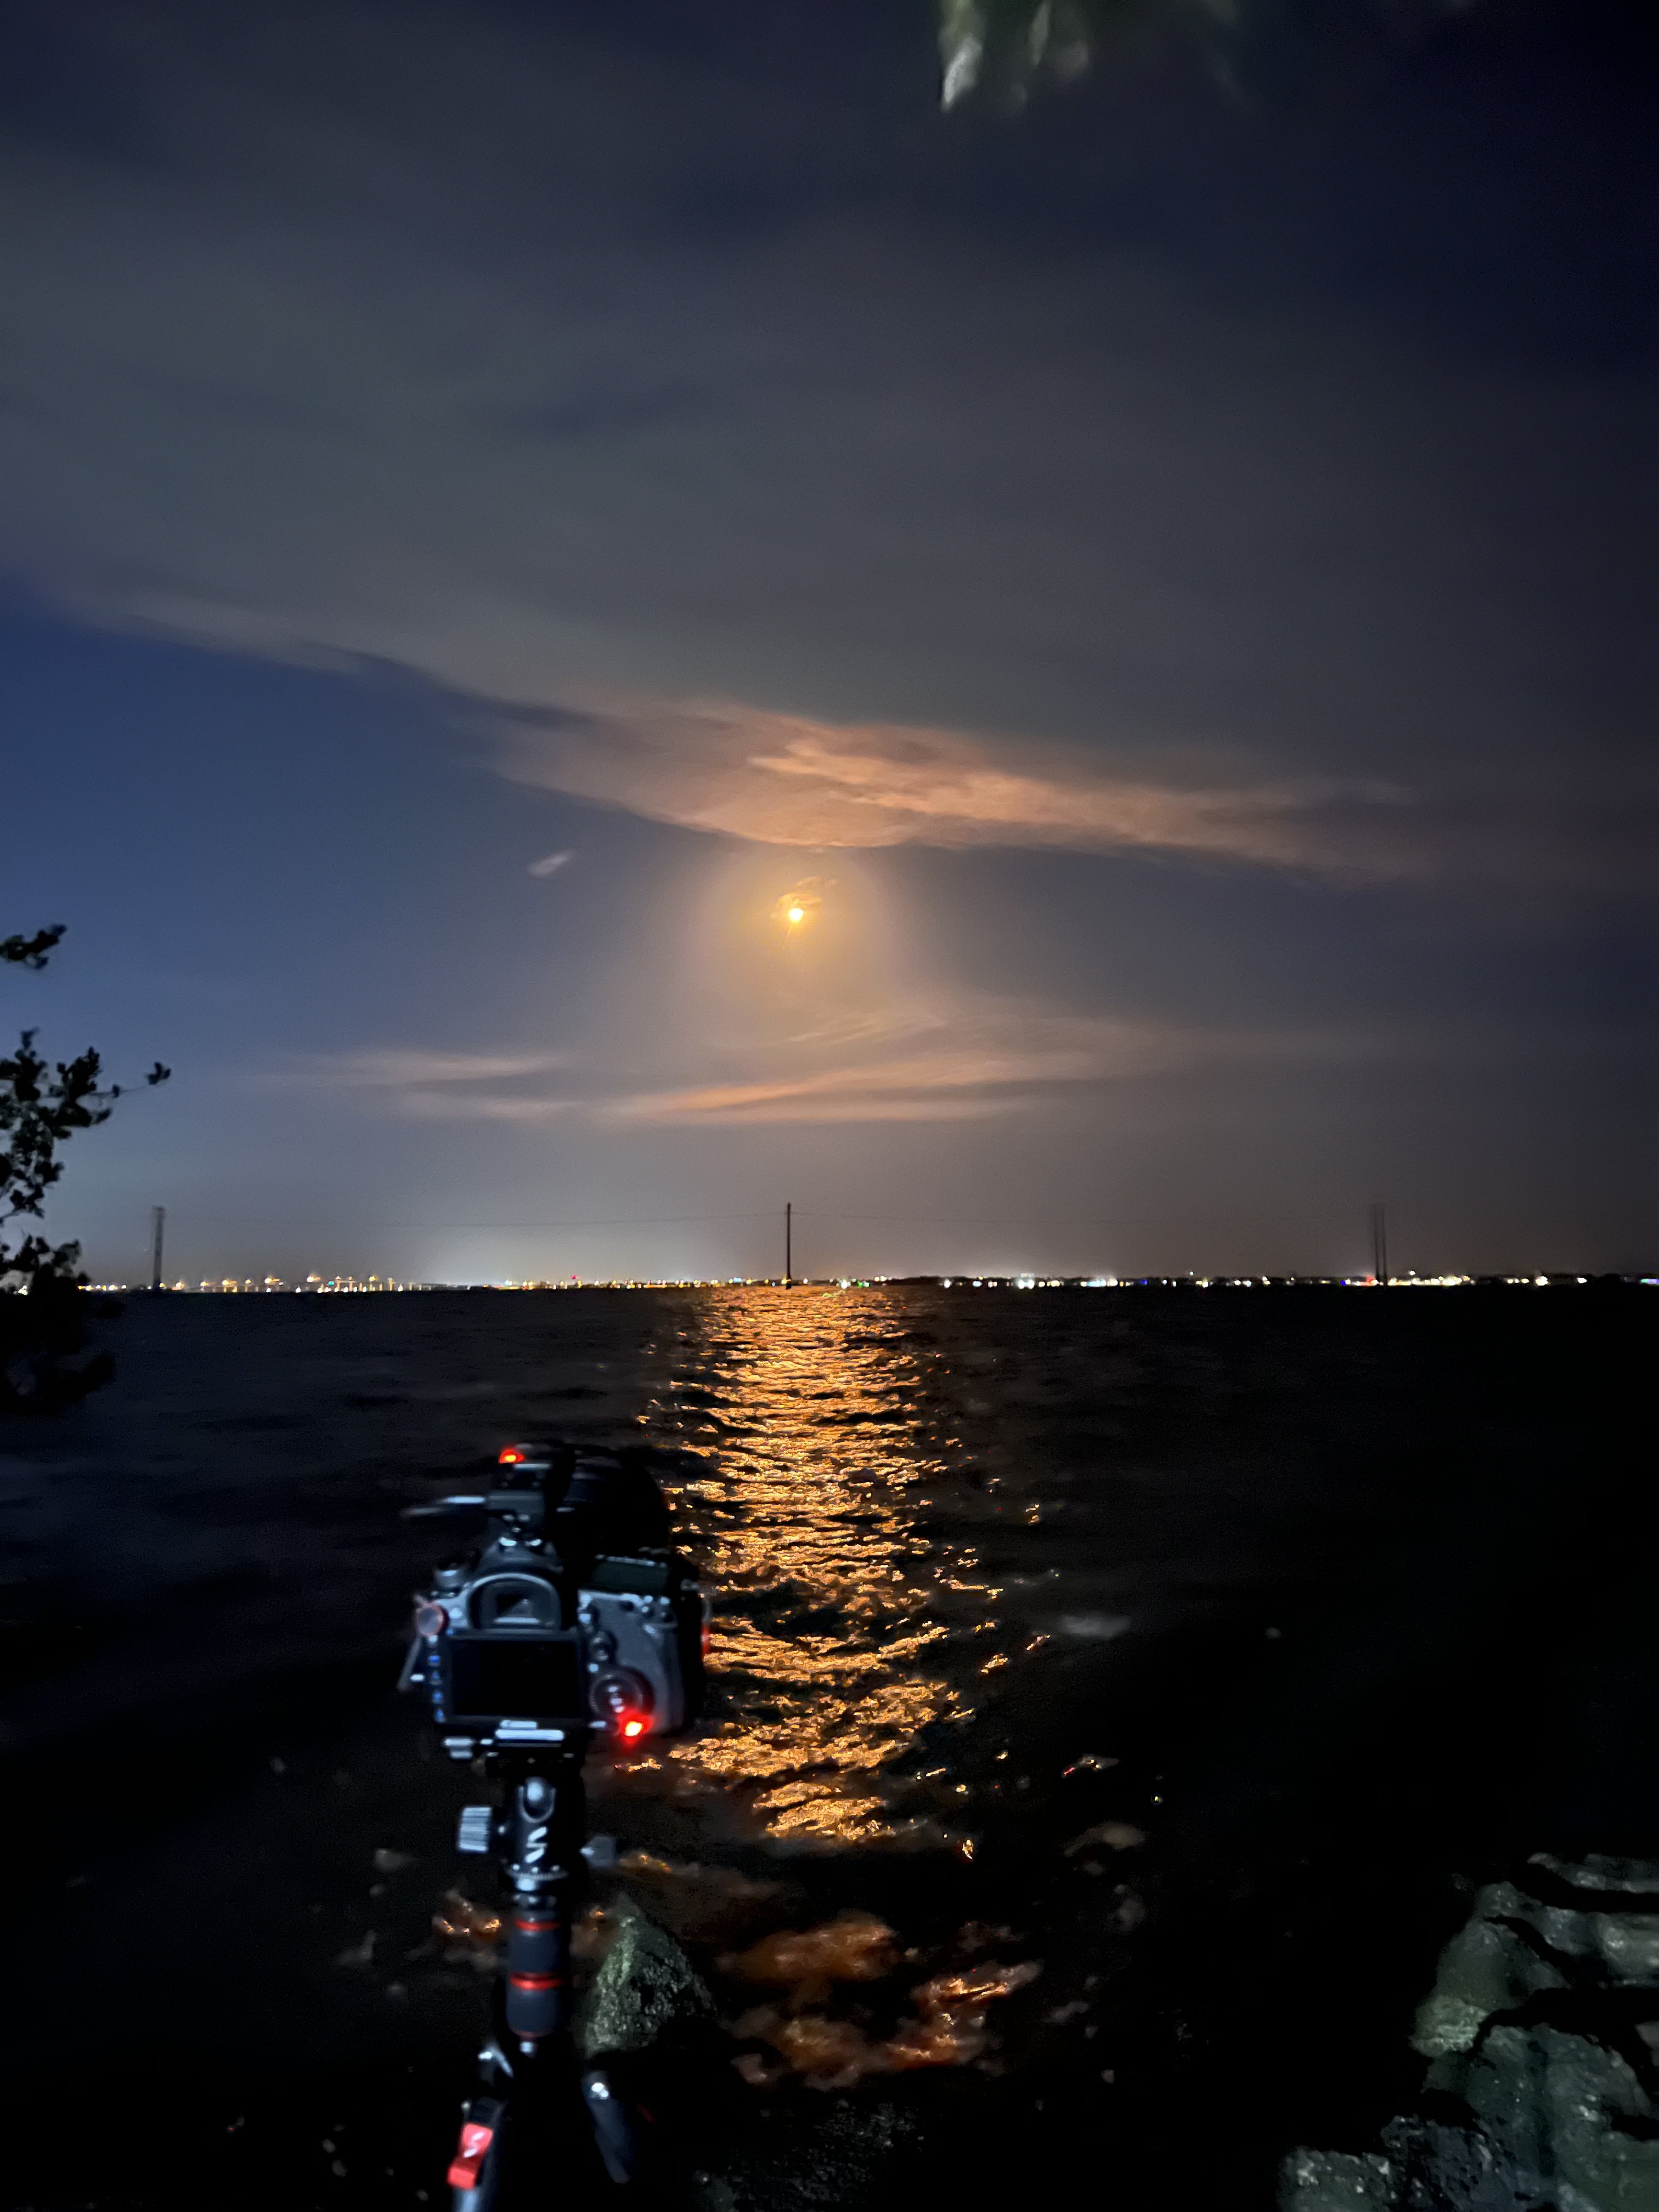 SpaceX rocket launch at night, the orange glow of the rocket plume reflecting on the water from the river in the foreground. A black digital camera on a tripod in the foreground captures the event.